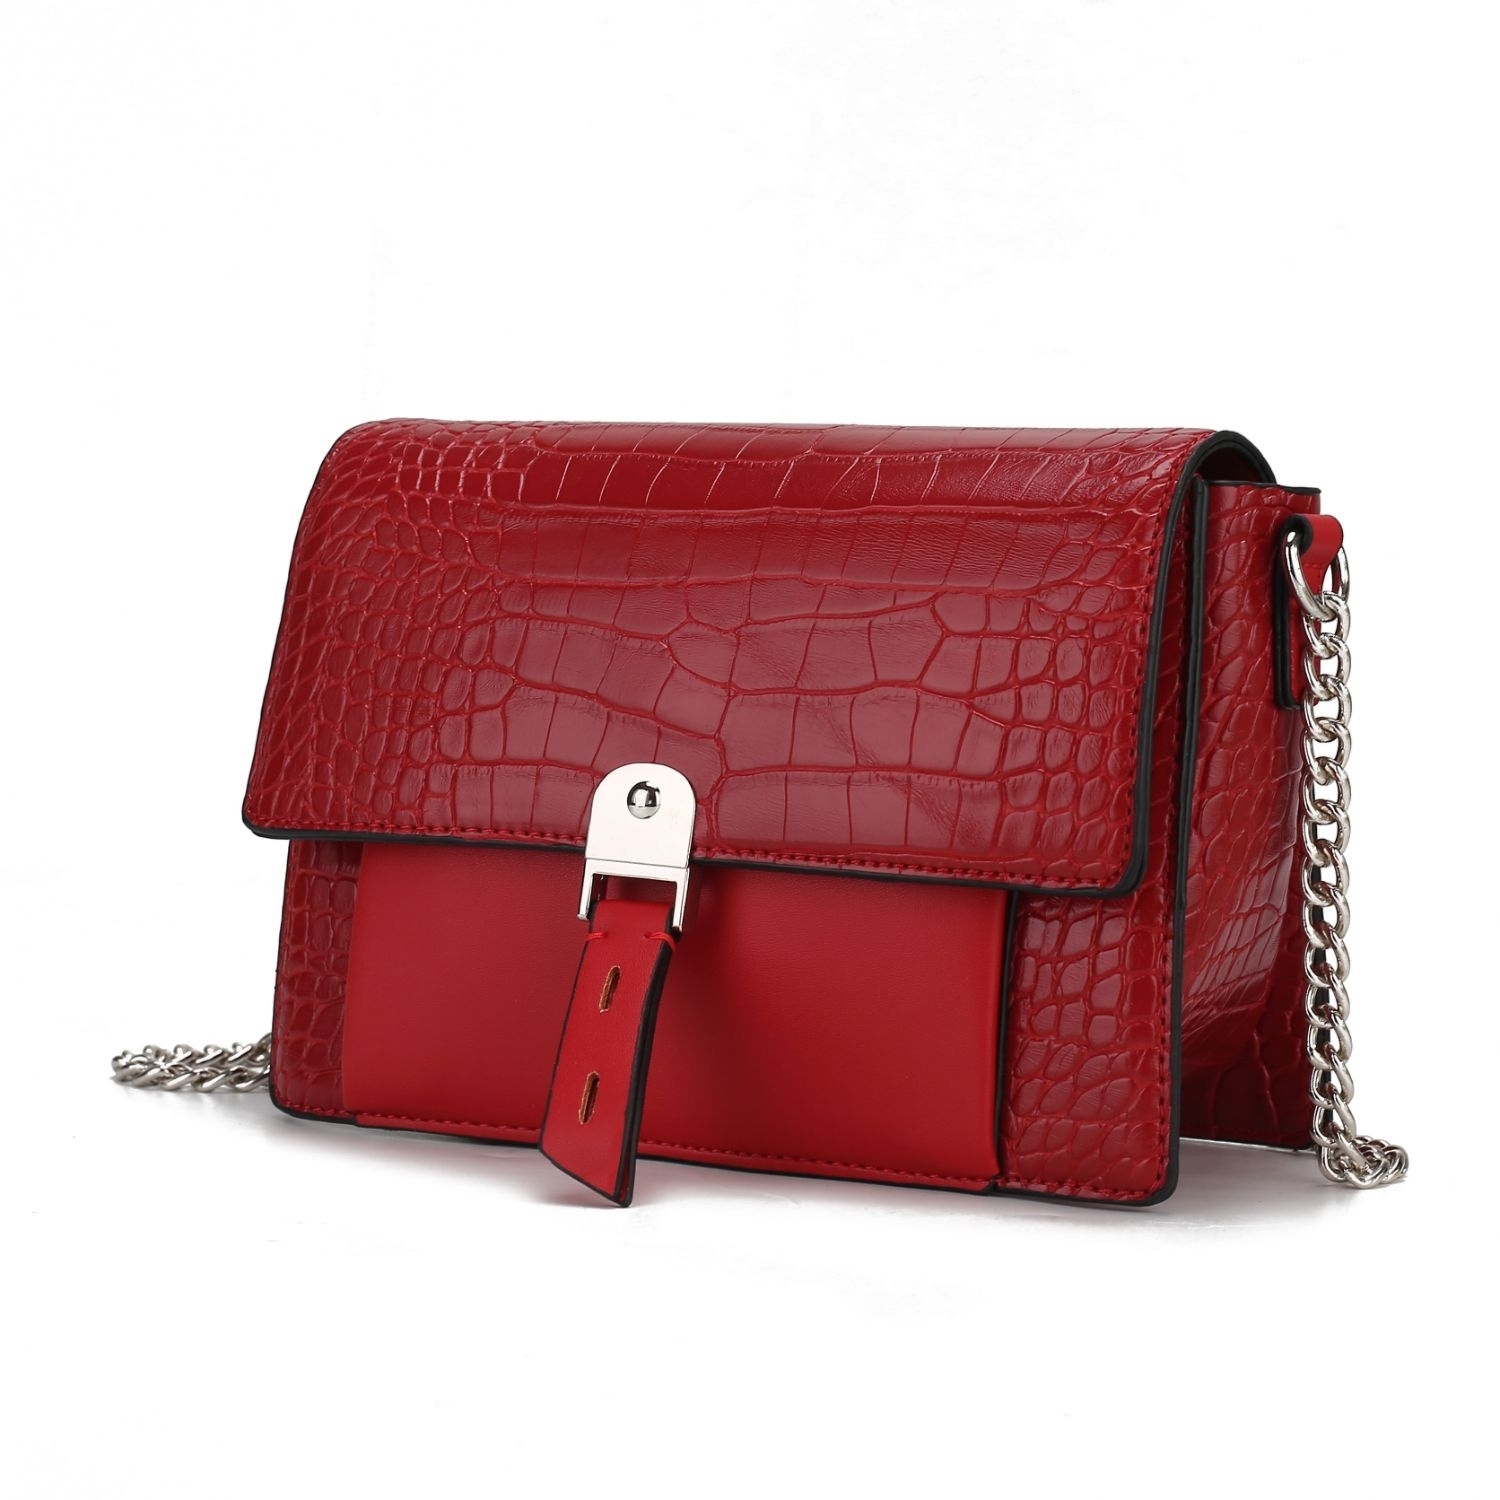 MKF Collection Hope Crocodile Embossed Vegan Leather Womens Shoulder Bag By Mia K - Red